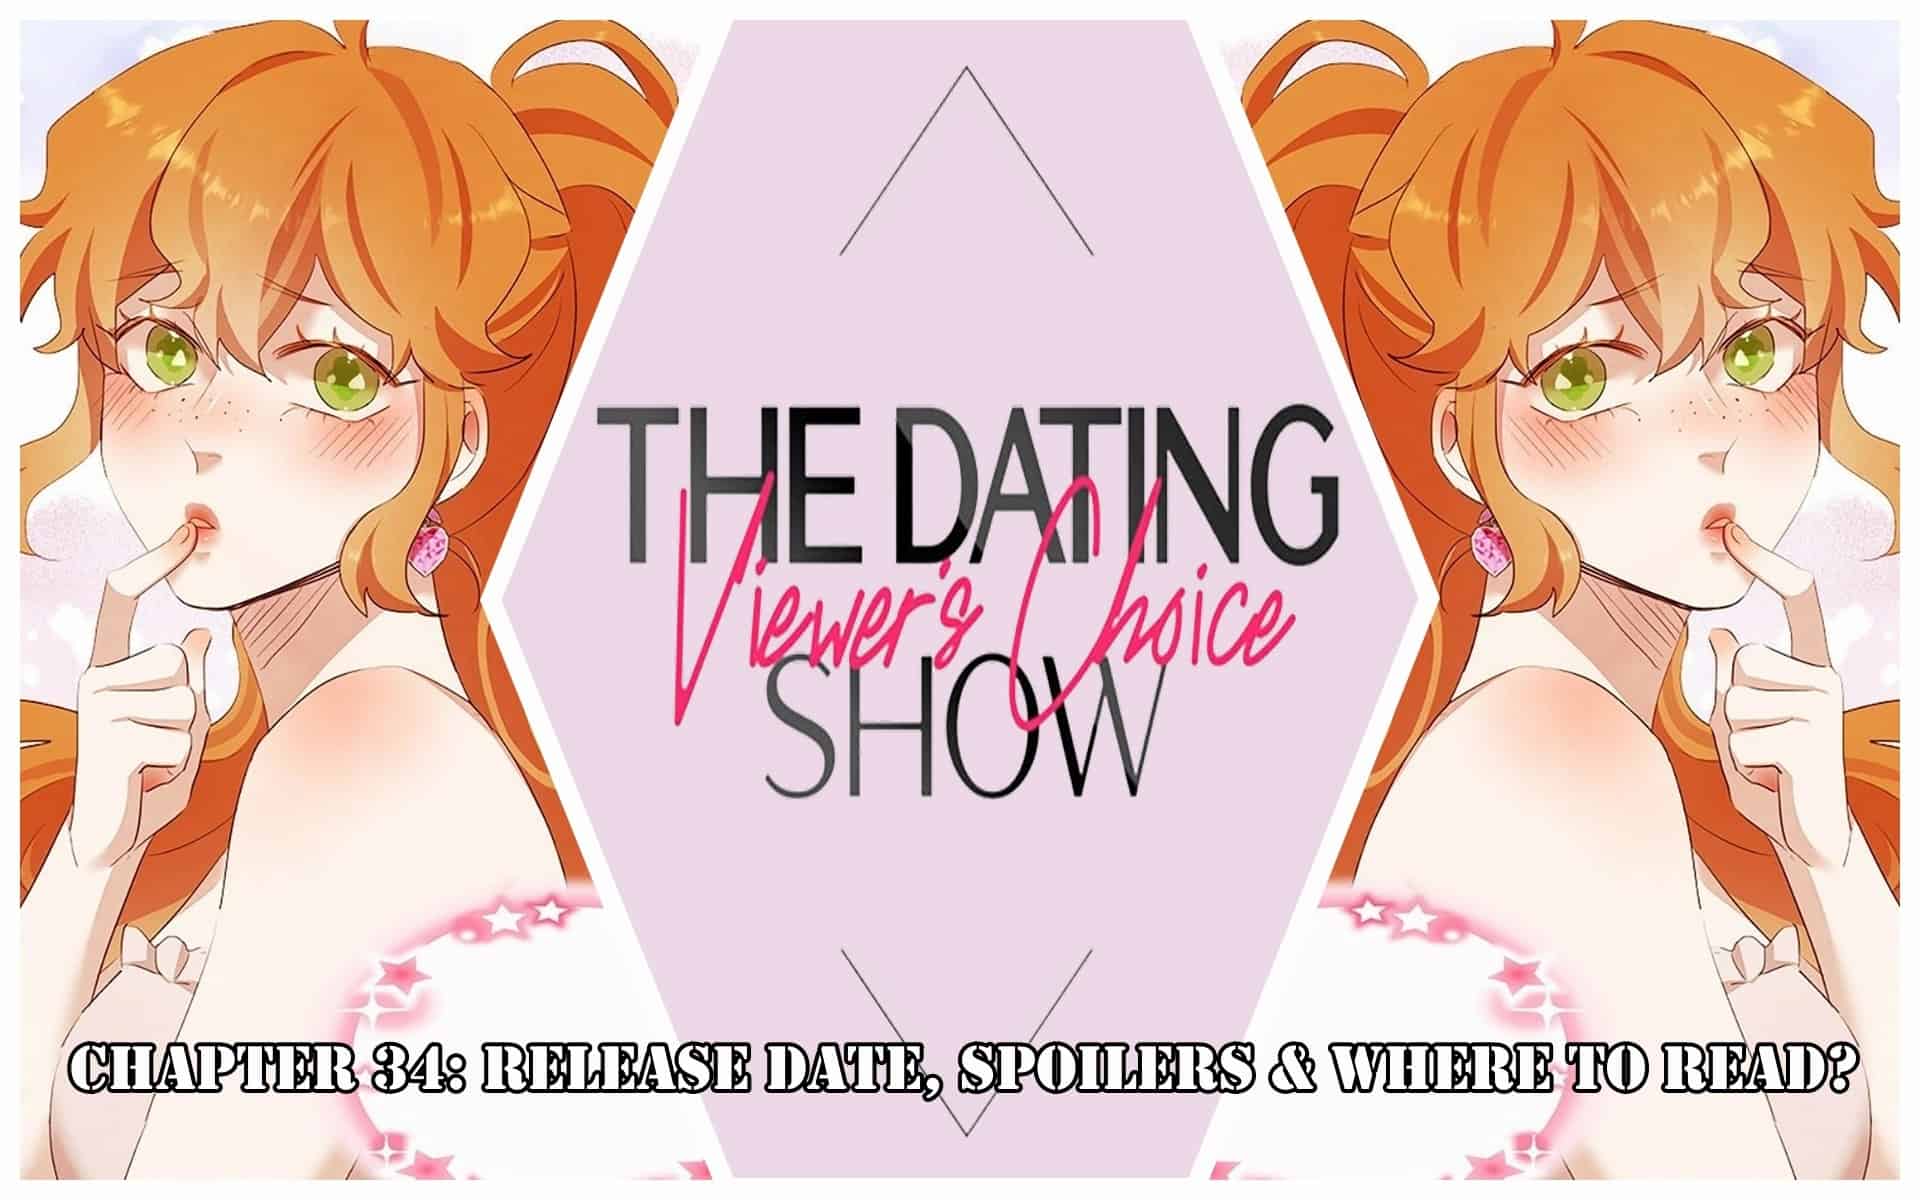 Viewer’s Choice: The Dating Show Chapter 34: Release Date, Spoilers & Where to Read?